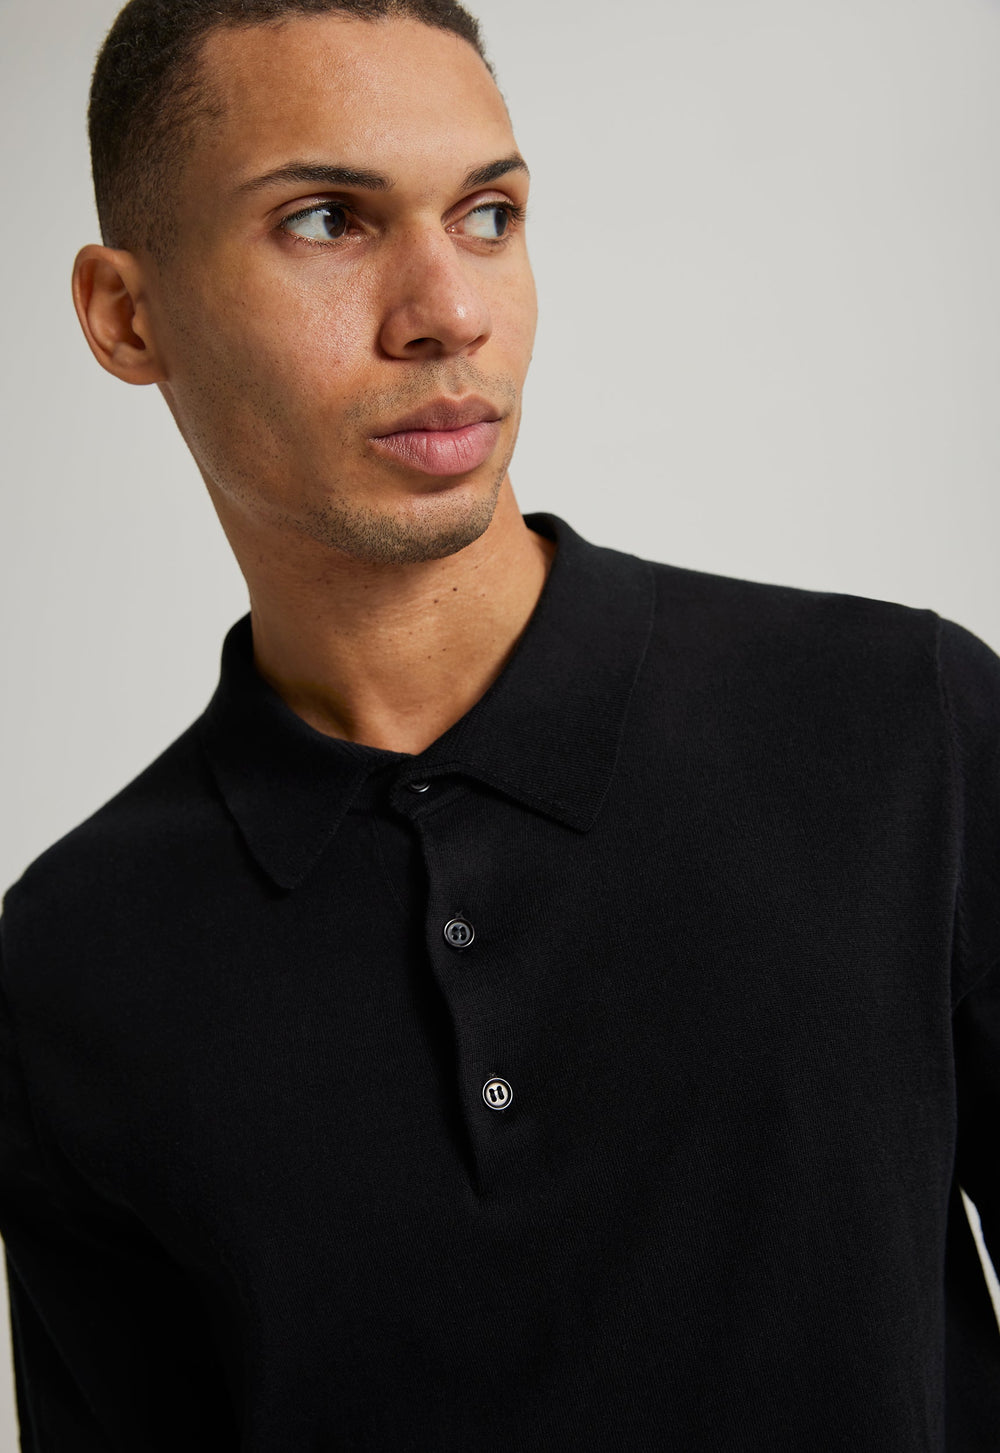 Jac+Jack POINTIER COTTON POLO in Black